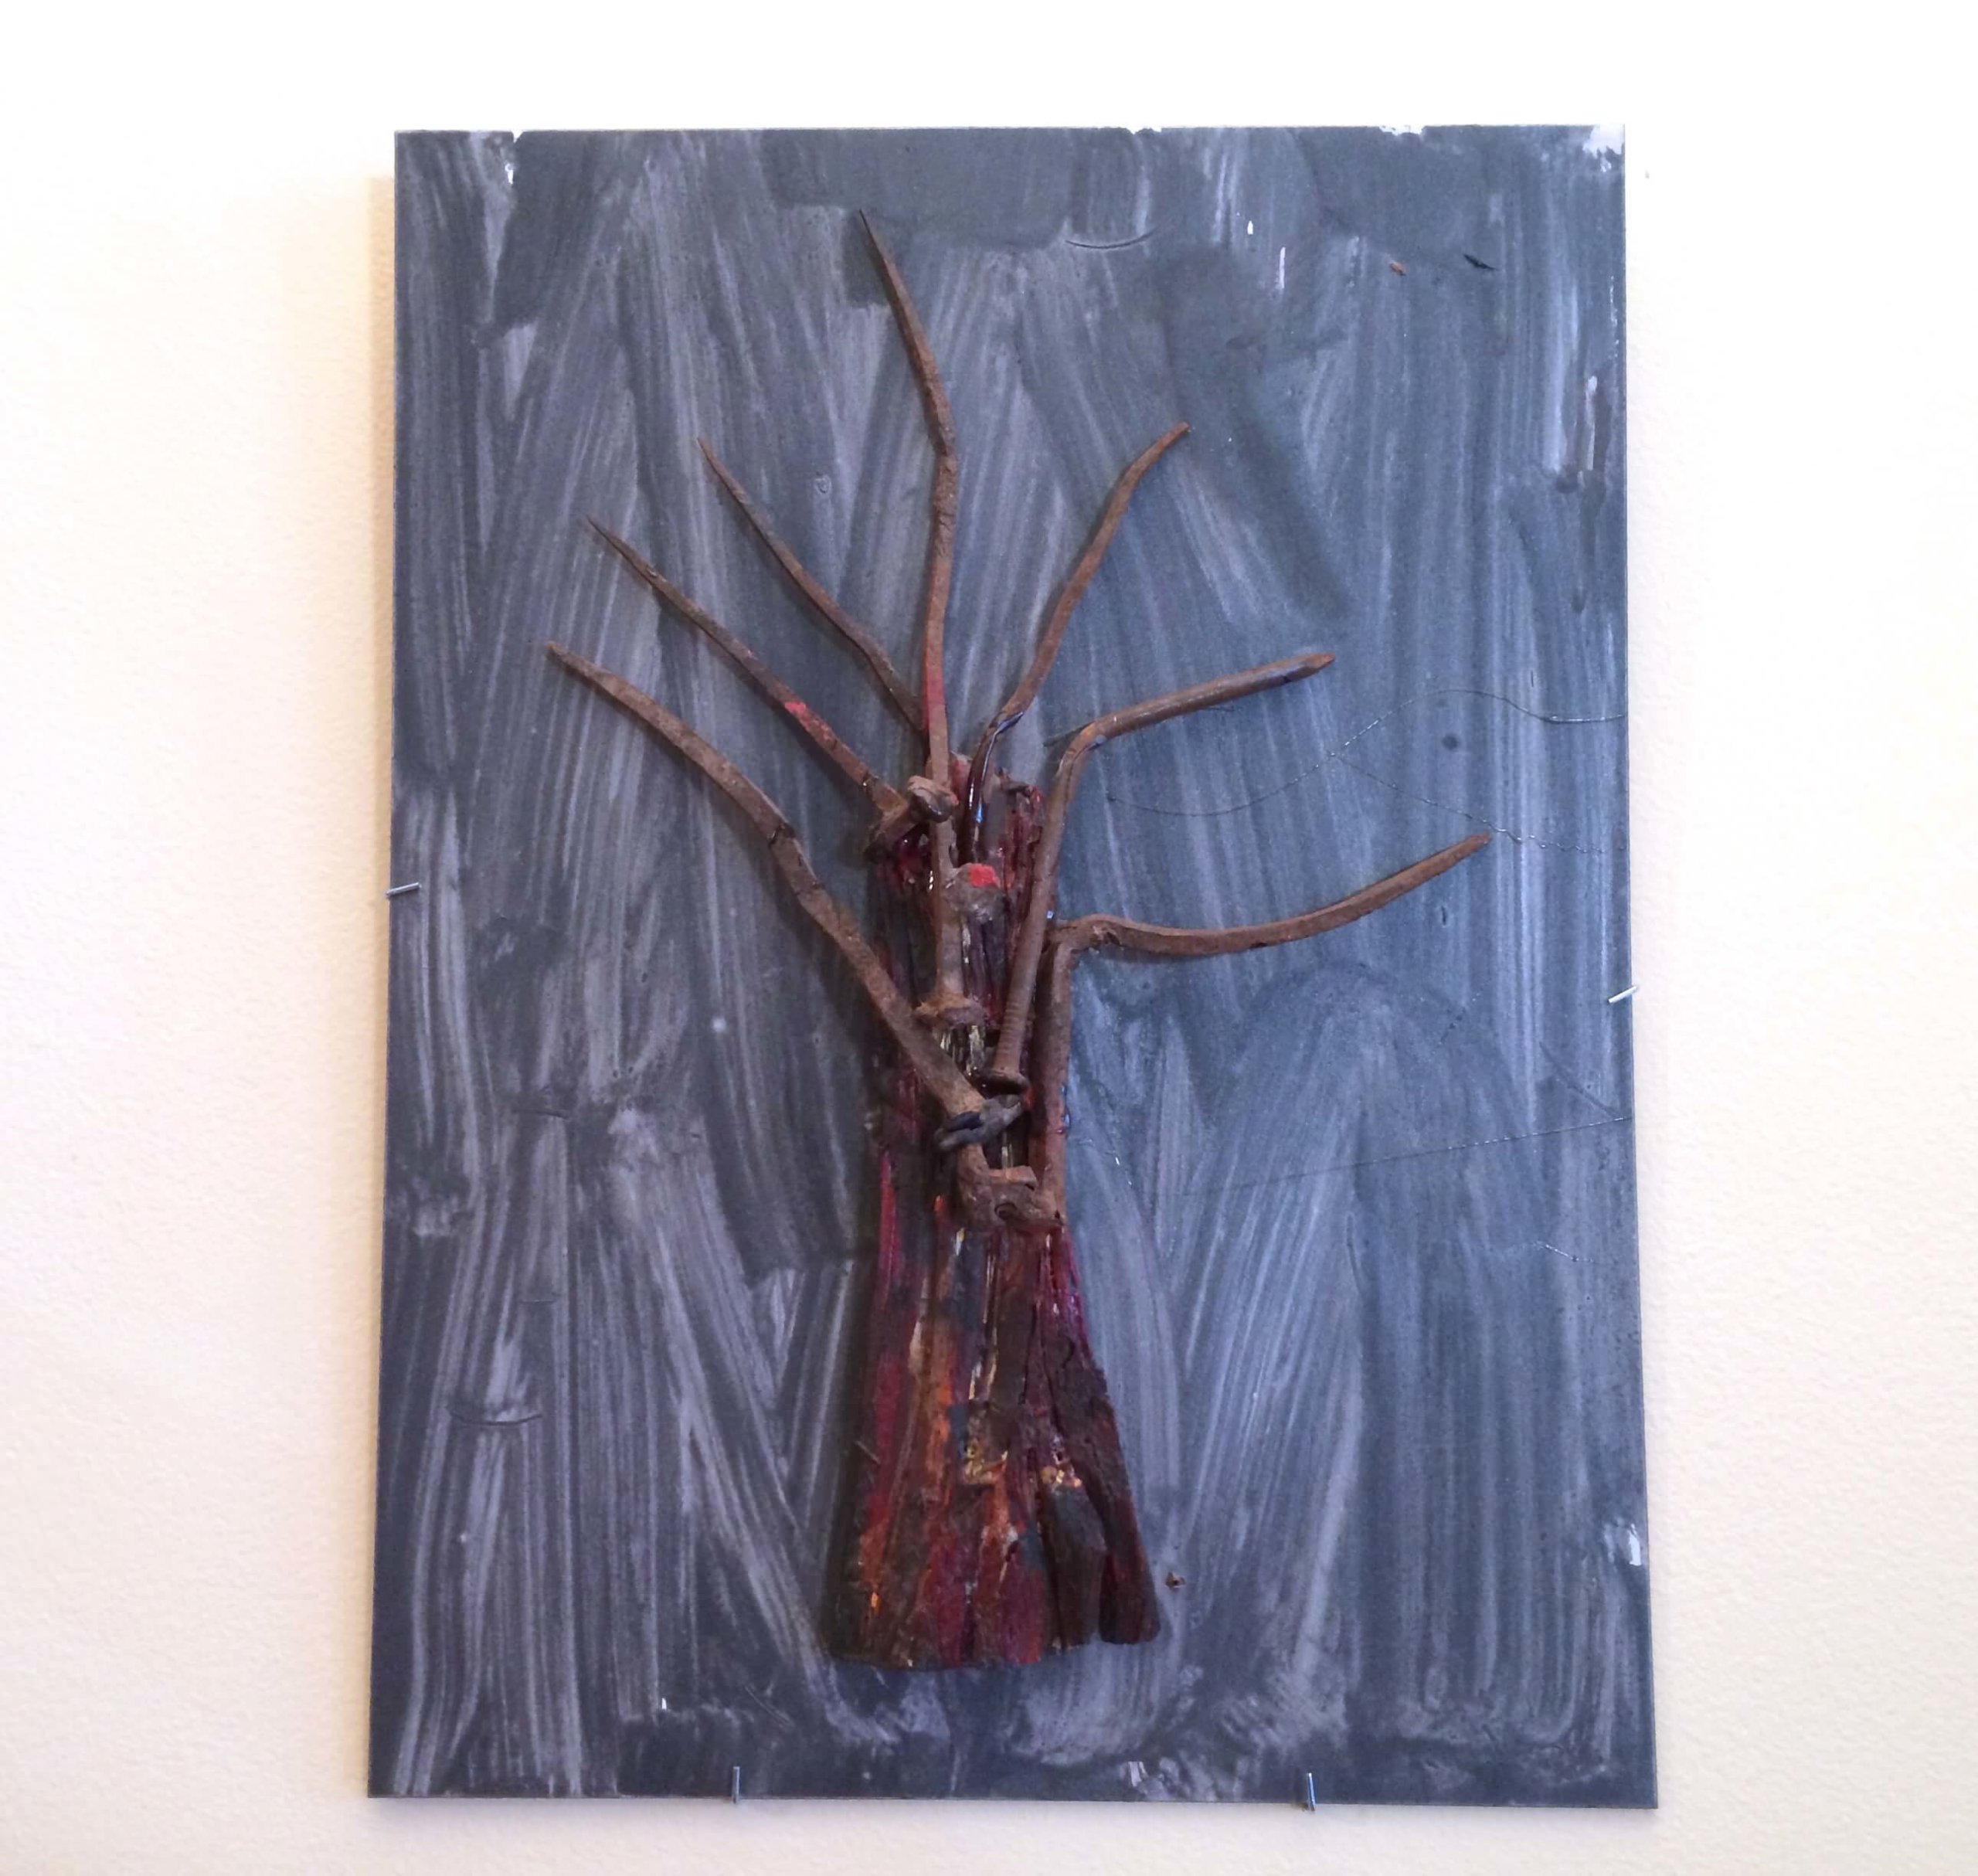 Fletcher Copp, Tree in an Iron Monger’s Yard, mixed media, 16 x 12 x 2 inches, 2013 (courtesy of The Painting Center)